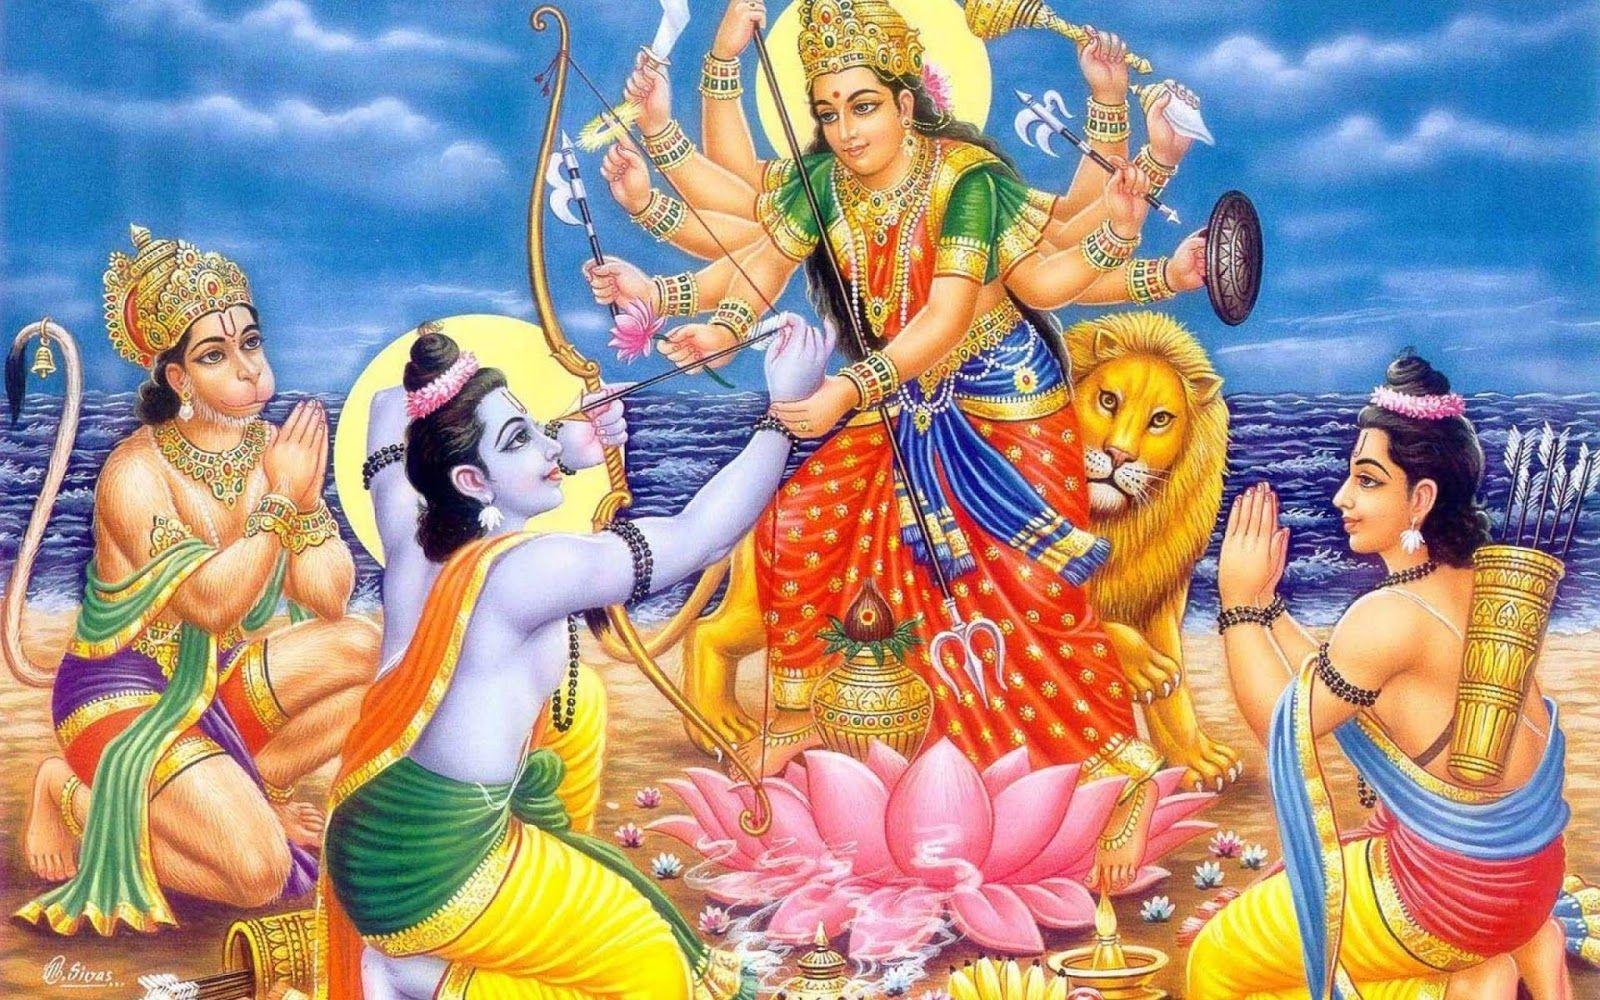 Download Free HD Wallpaper and Image of Shree ram / जय श्री